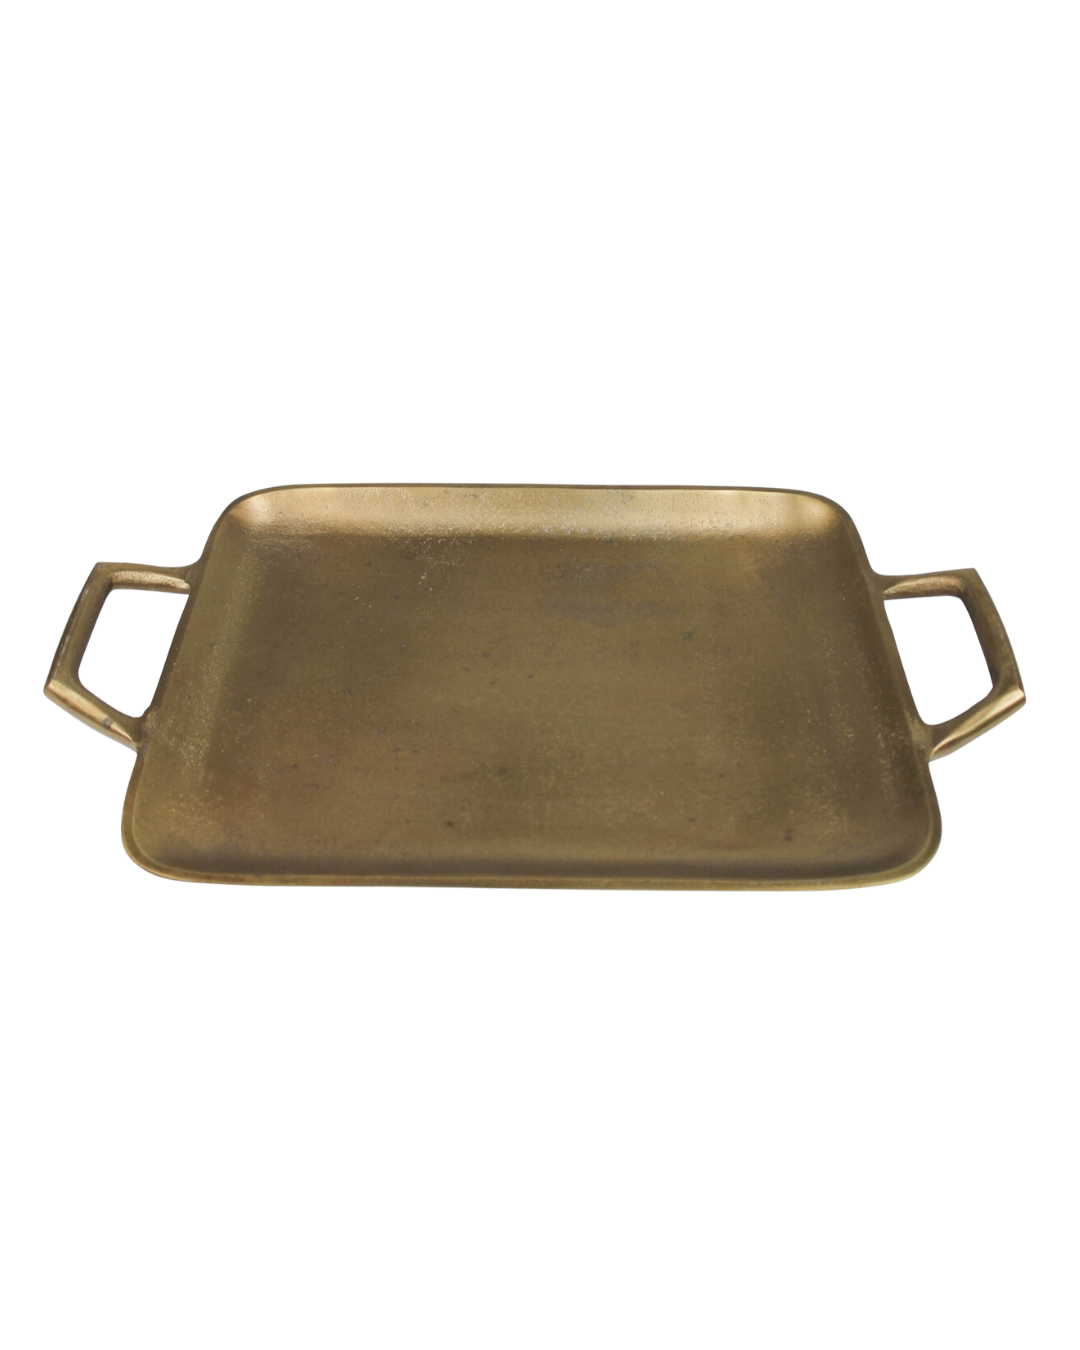 A plain, rectangular Murray Tray Brass Small with two handles, isolated on a white background, evocative of a bungalow style.